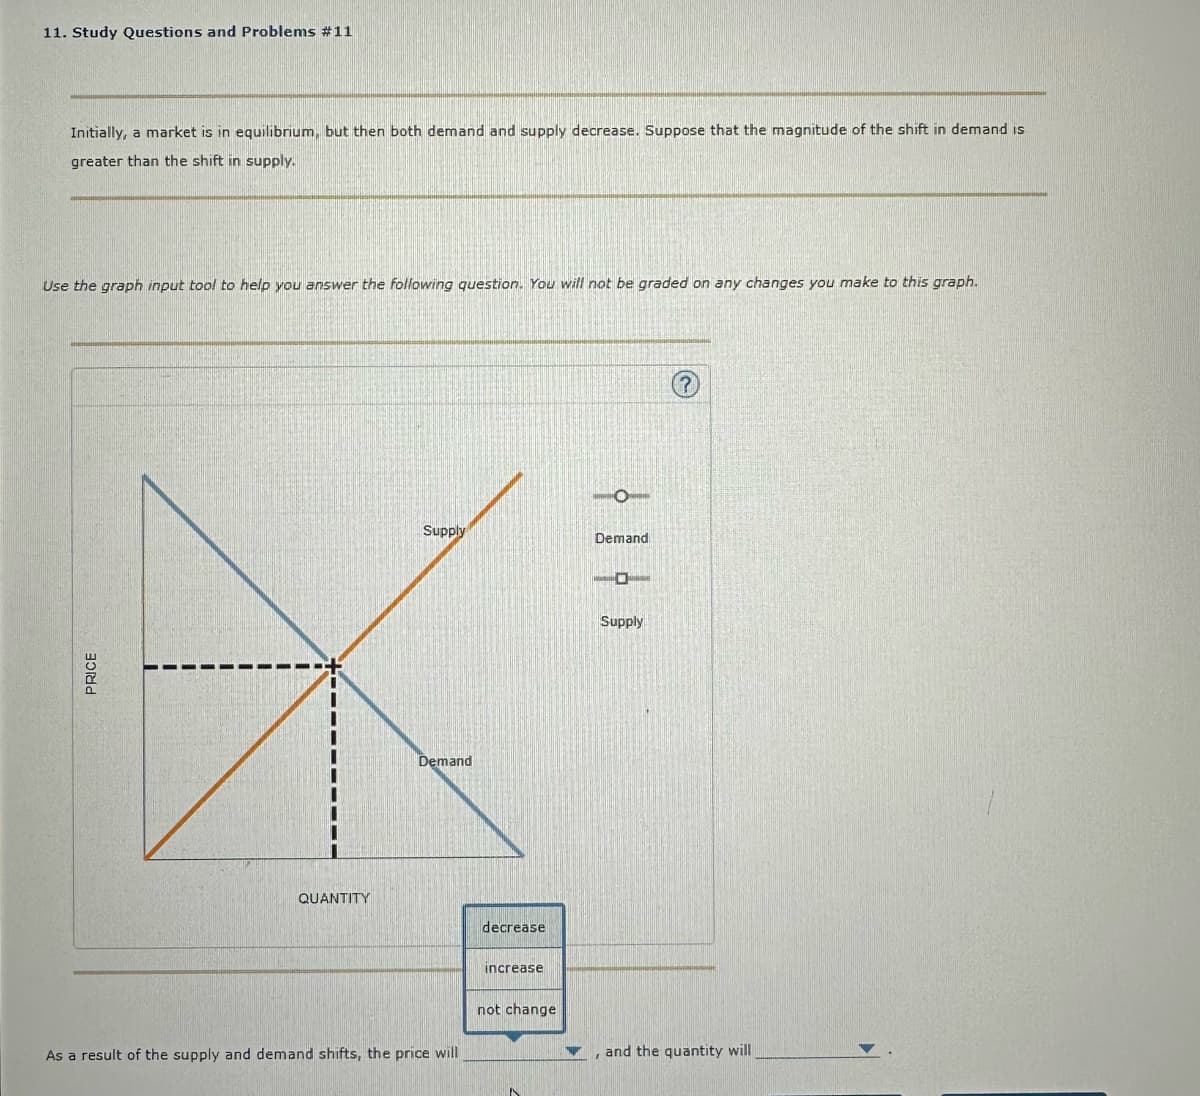 11. Study Questions and Problems #11
Initially, a market is in equilibrium, but then both demand and supply decrease. Suppose that the magnitude of the shift in demand is
greater than the shift in supply.
Use the graph input tool to help you answer the following question. You will not be graded on any changes you make to this graph.
PRICE
QUANTITY
Supply
Demand
As a result of the supply and demand shifts, the price will
decrease
increase
not change
Demand
Supply
, and the quantity will